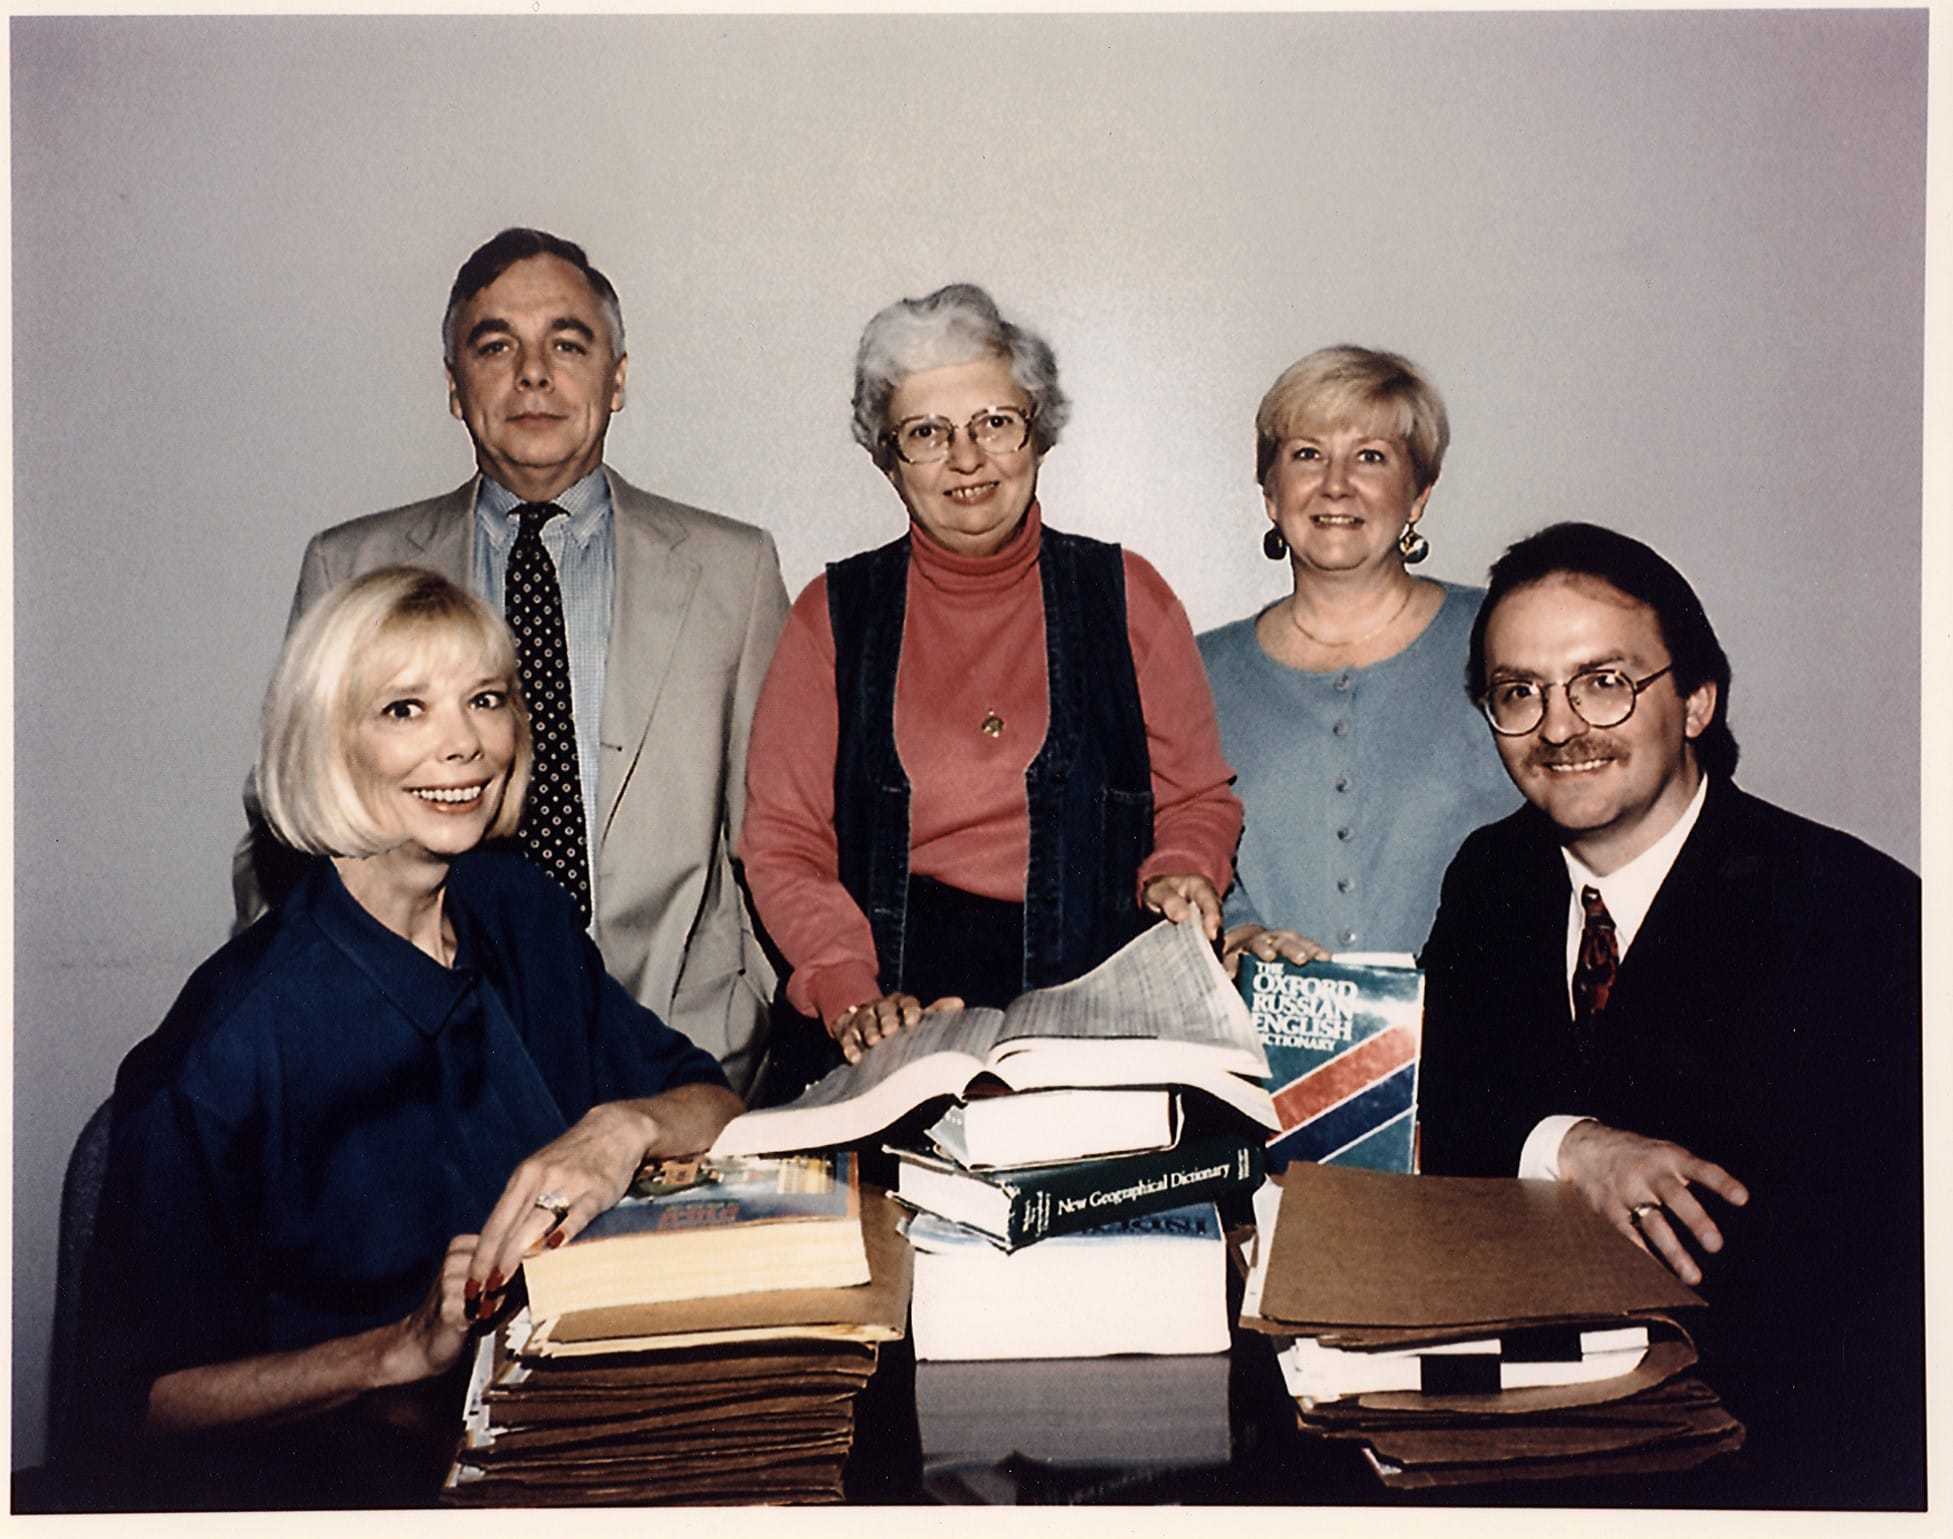 Jeanne Vertefeuille sitting at a desk surrounded by four officials.